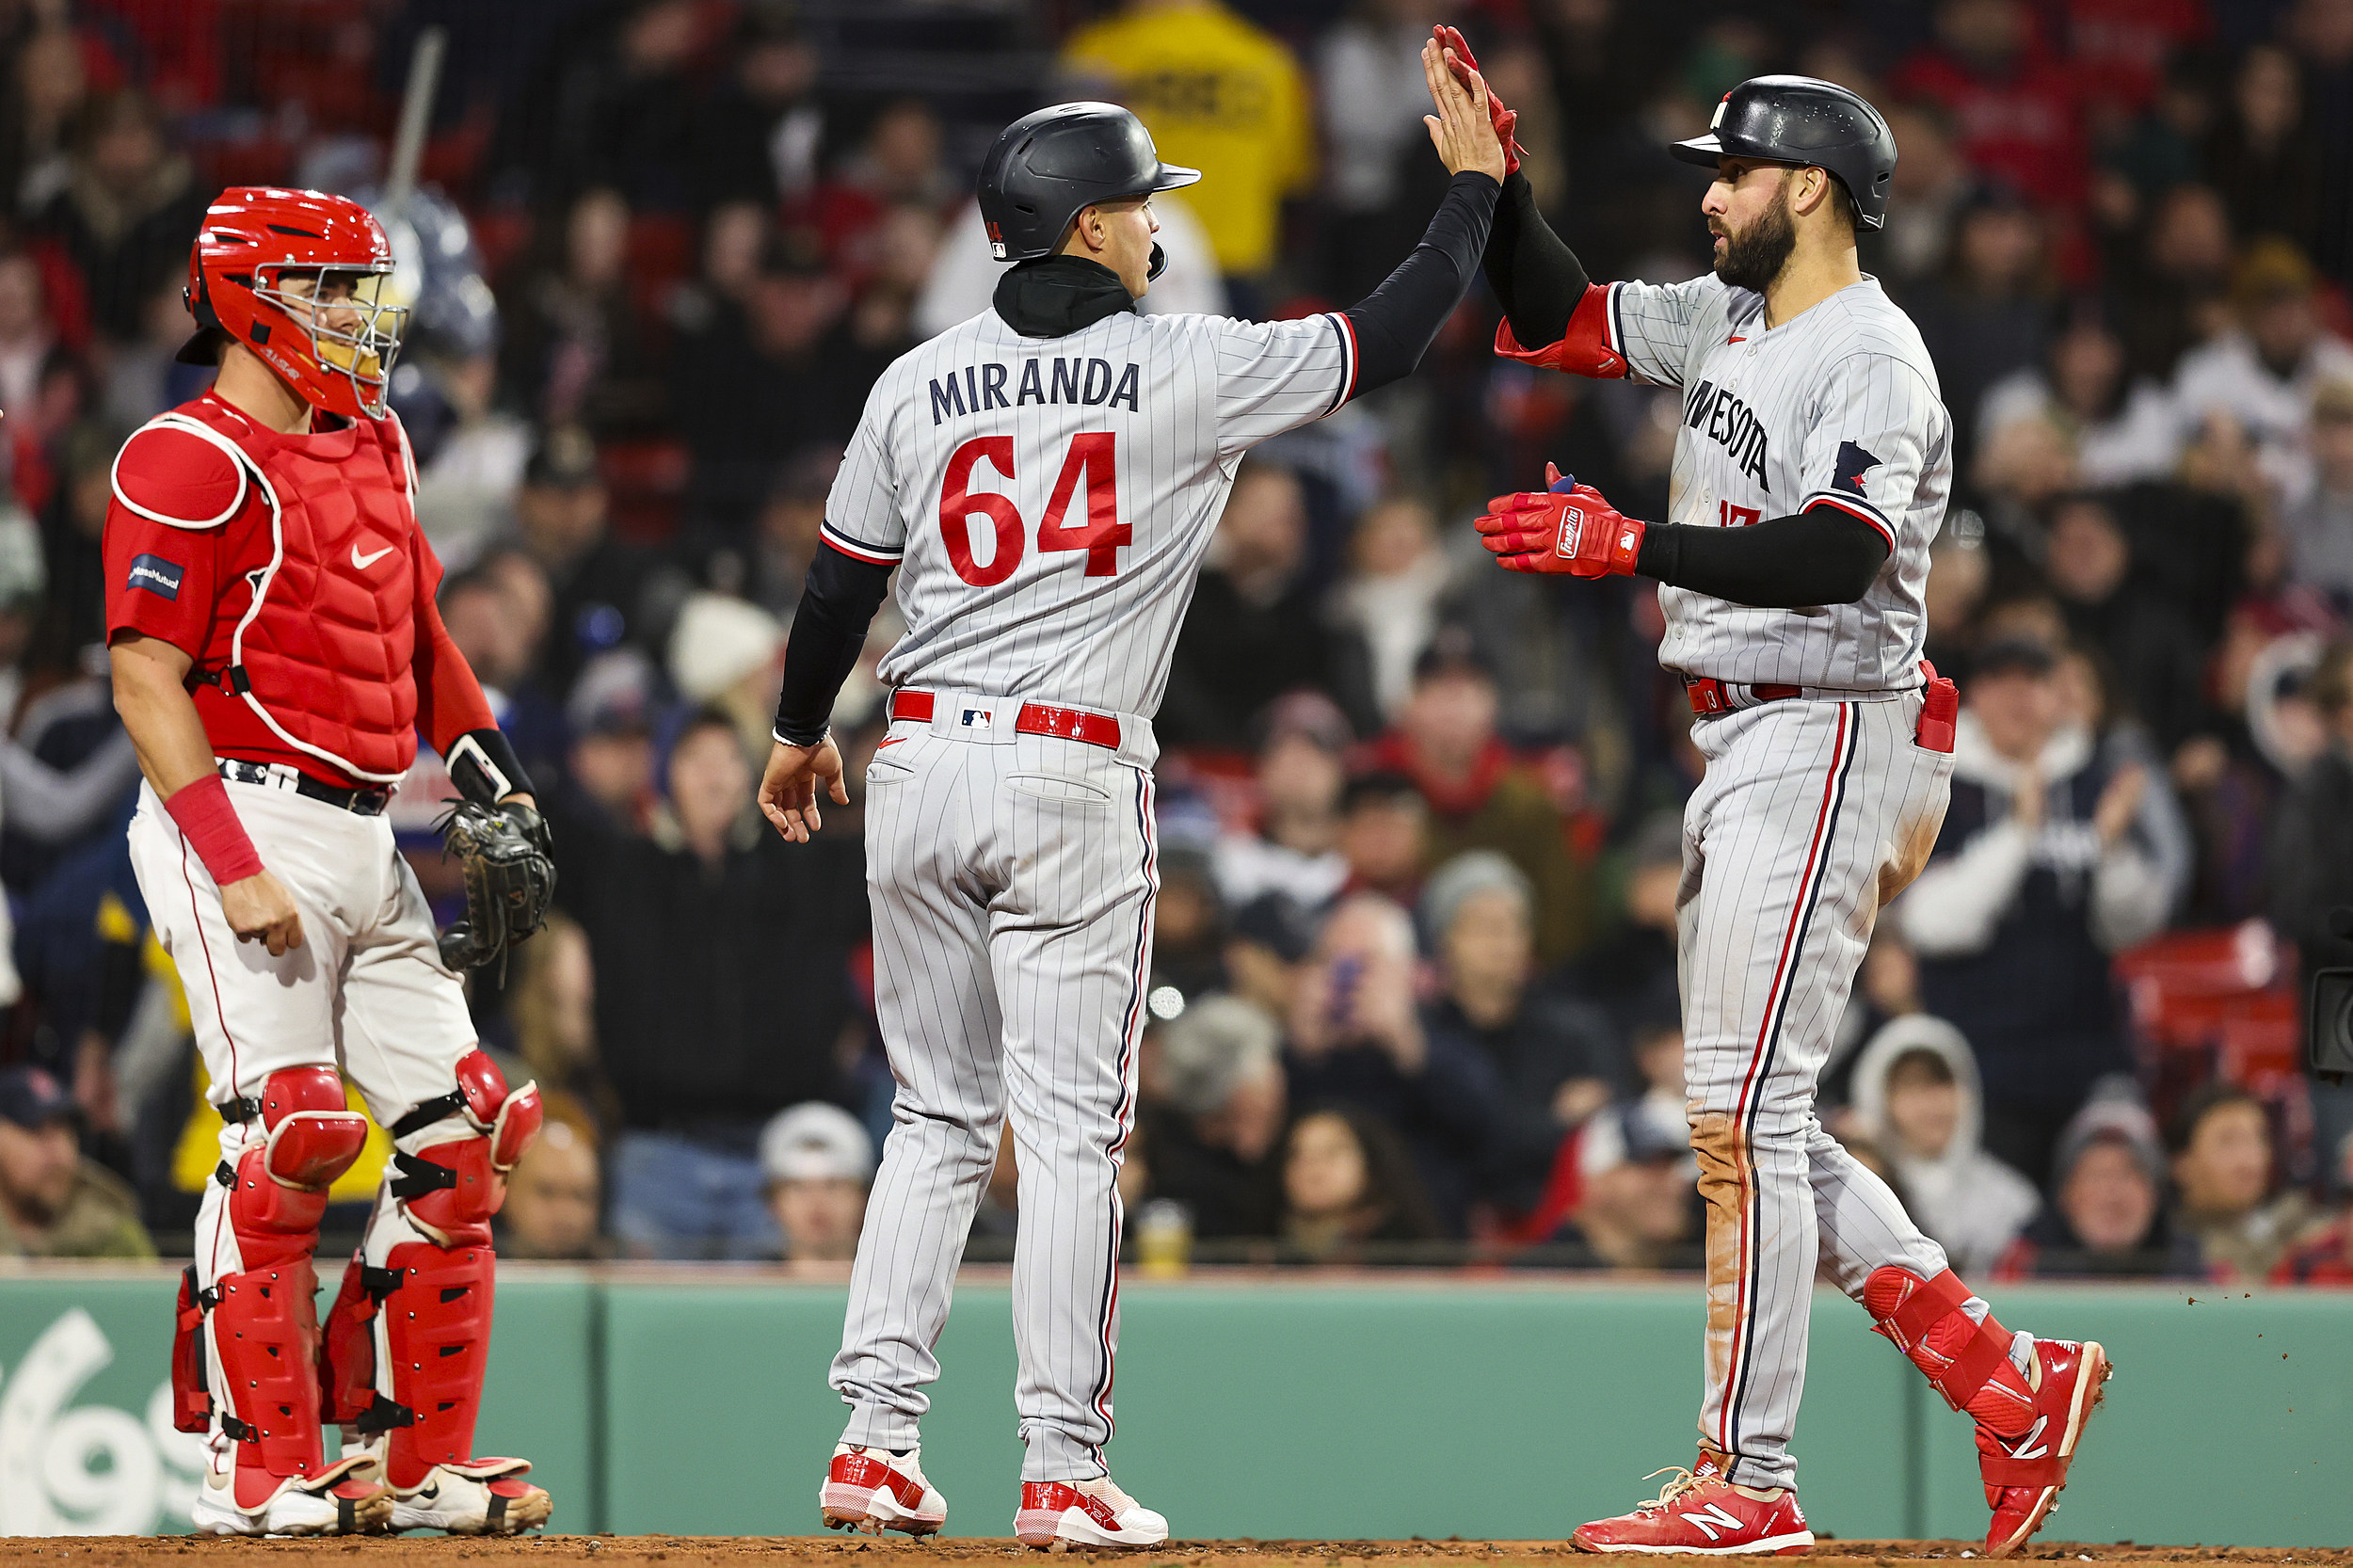 Trevor Story stays hot with grand slam as Red Sox extend winning